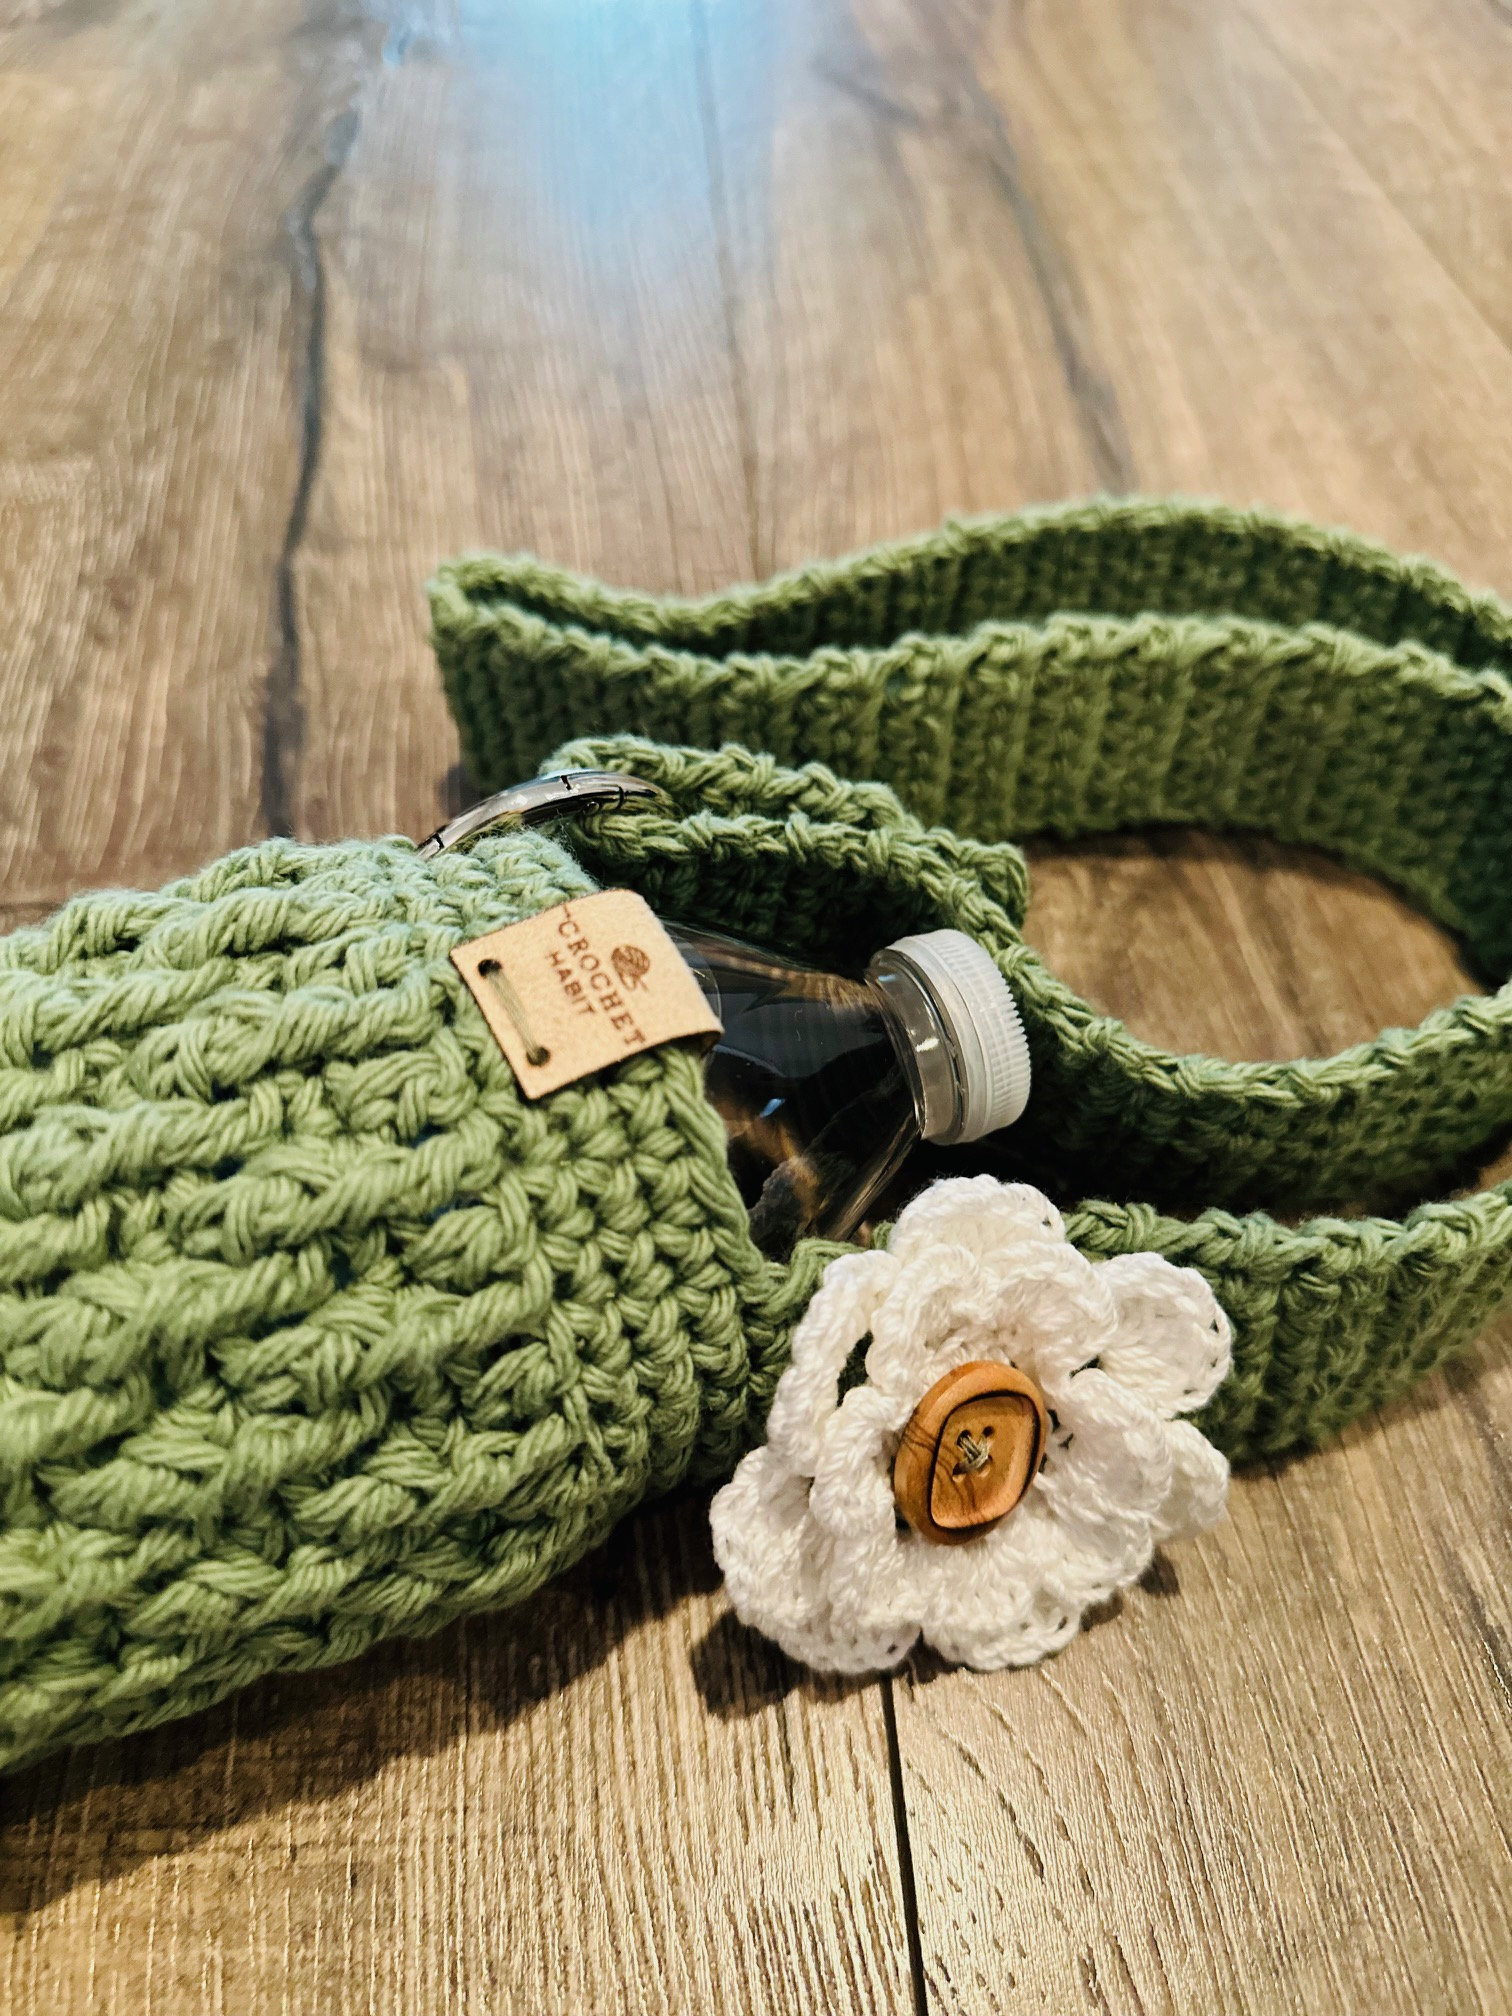 Pattern Only Cute, Fluffy, and Chunky Adjustable Crochet Flower Sling,  Messenger Bag Chunky Yarn 